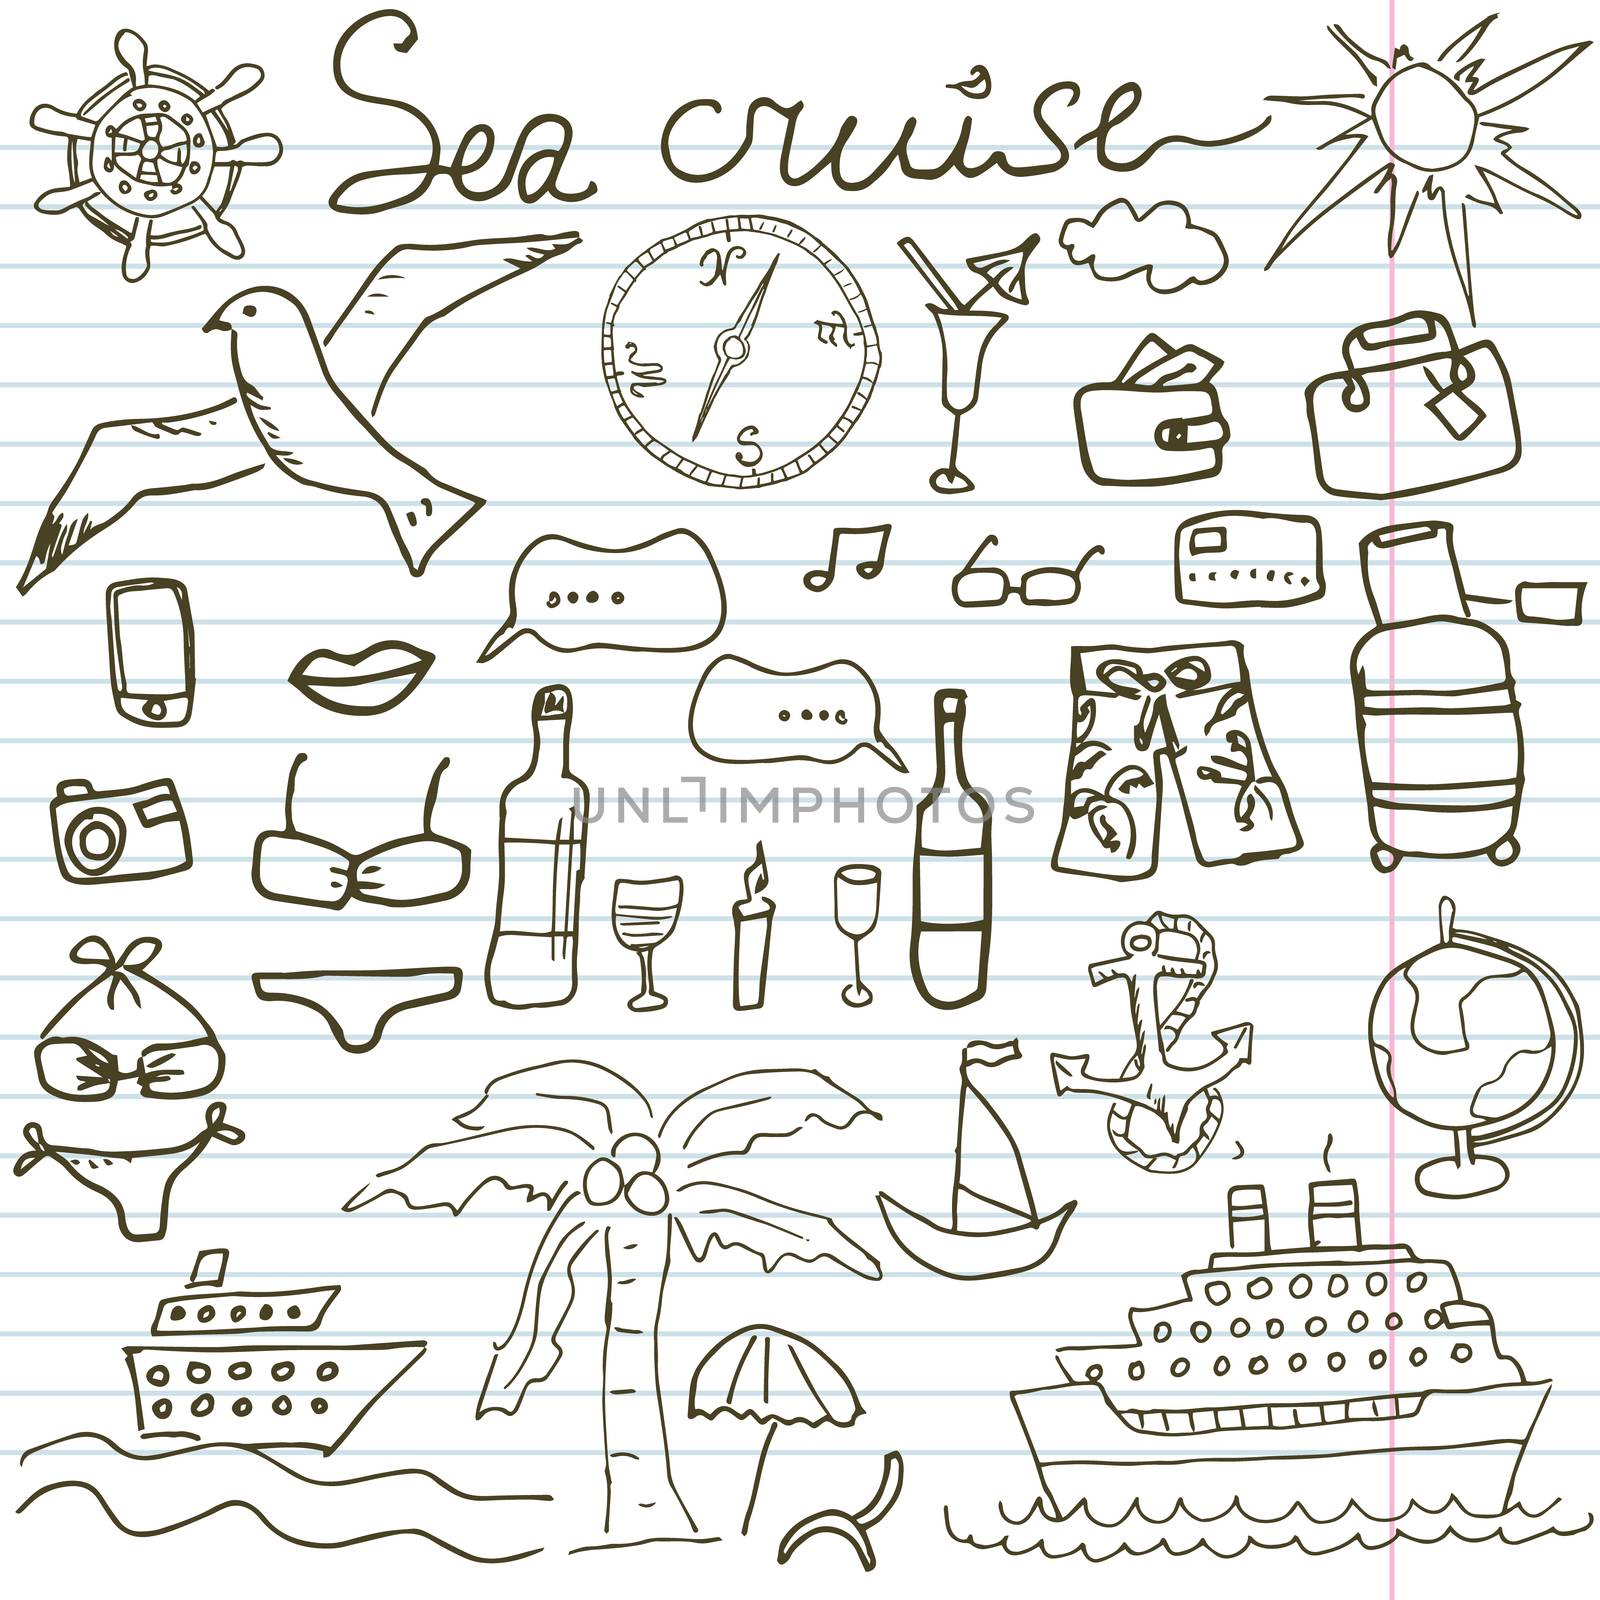 Hand drawn sketch sea cruise doodles vector illustration of Travel and summer elements, on paper notebook by Lemon_workshop